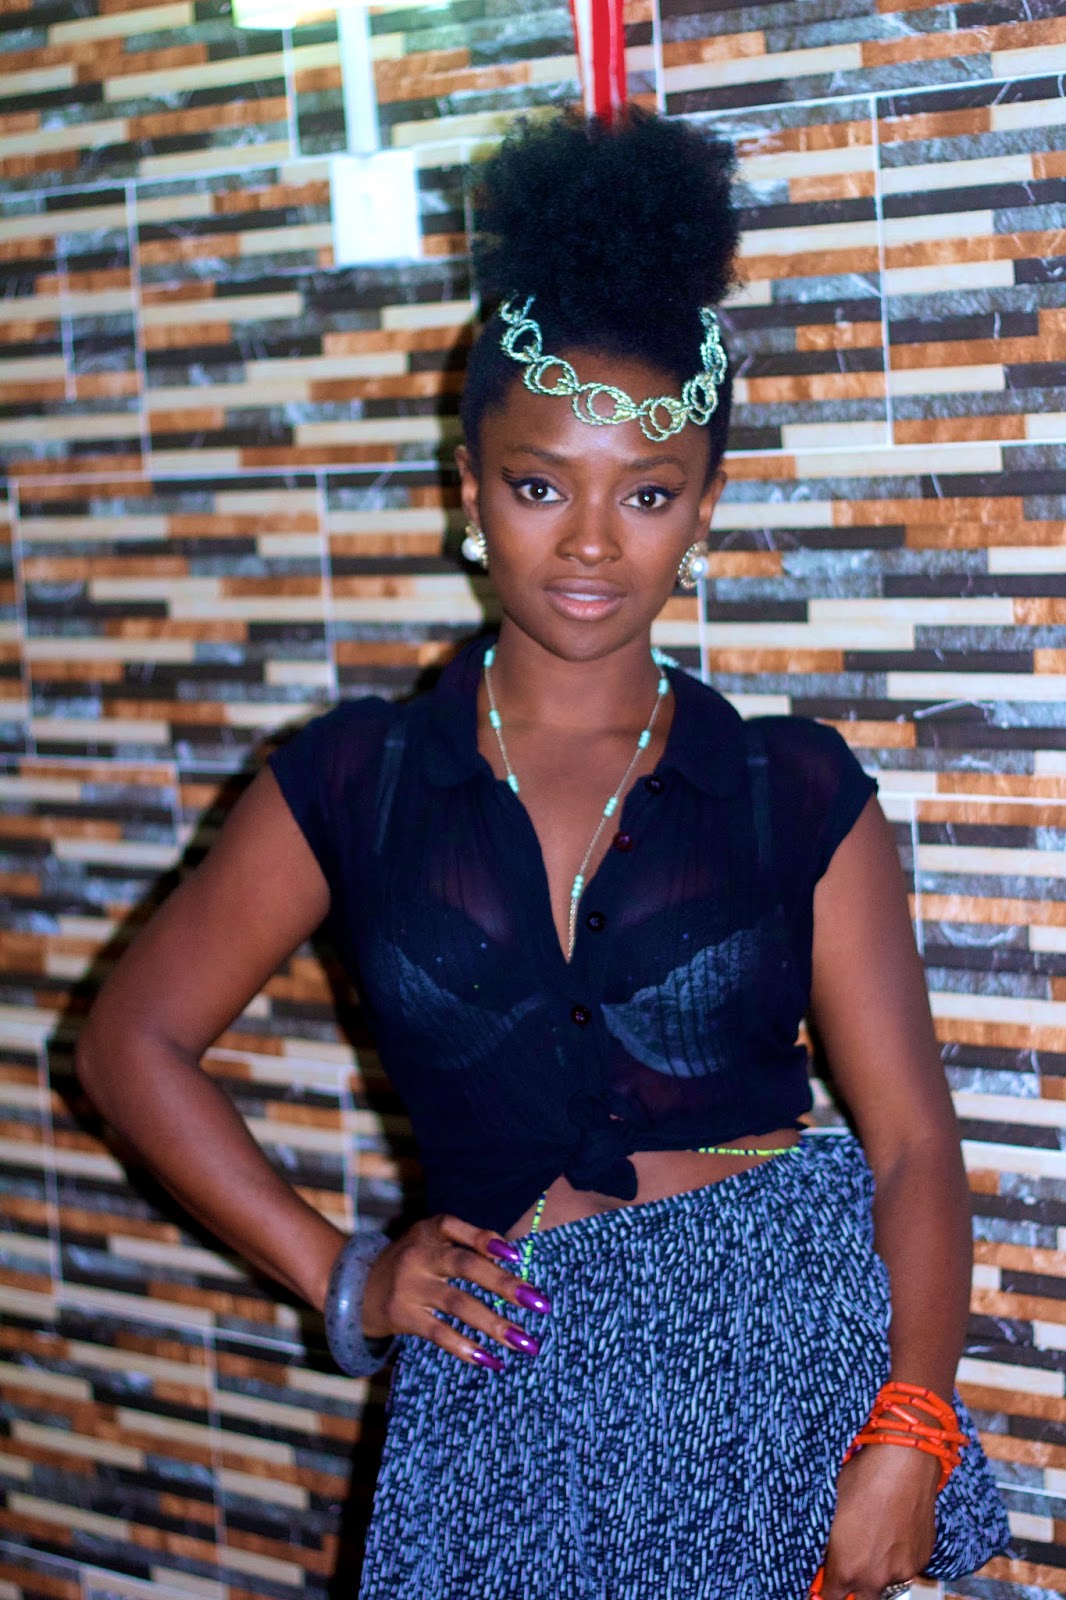 Nigerian singer Ify Otuya wears a see-through top and short skirt in photo from July 4 weekend.